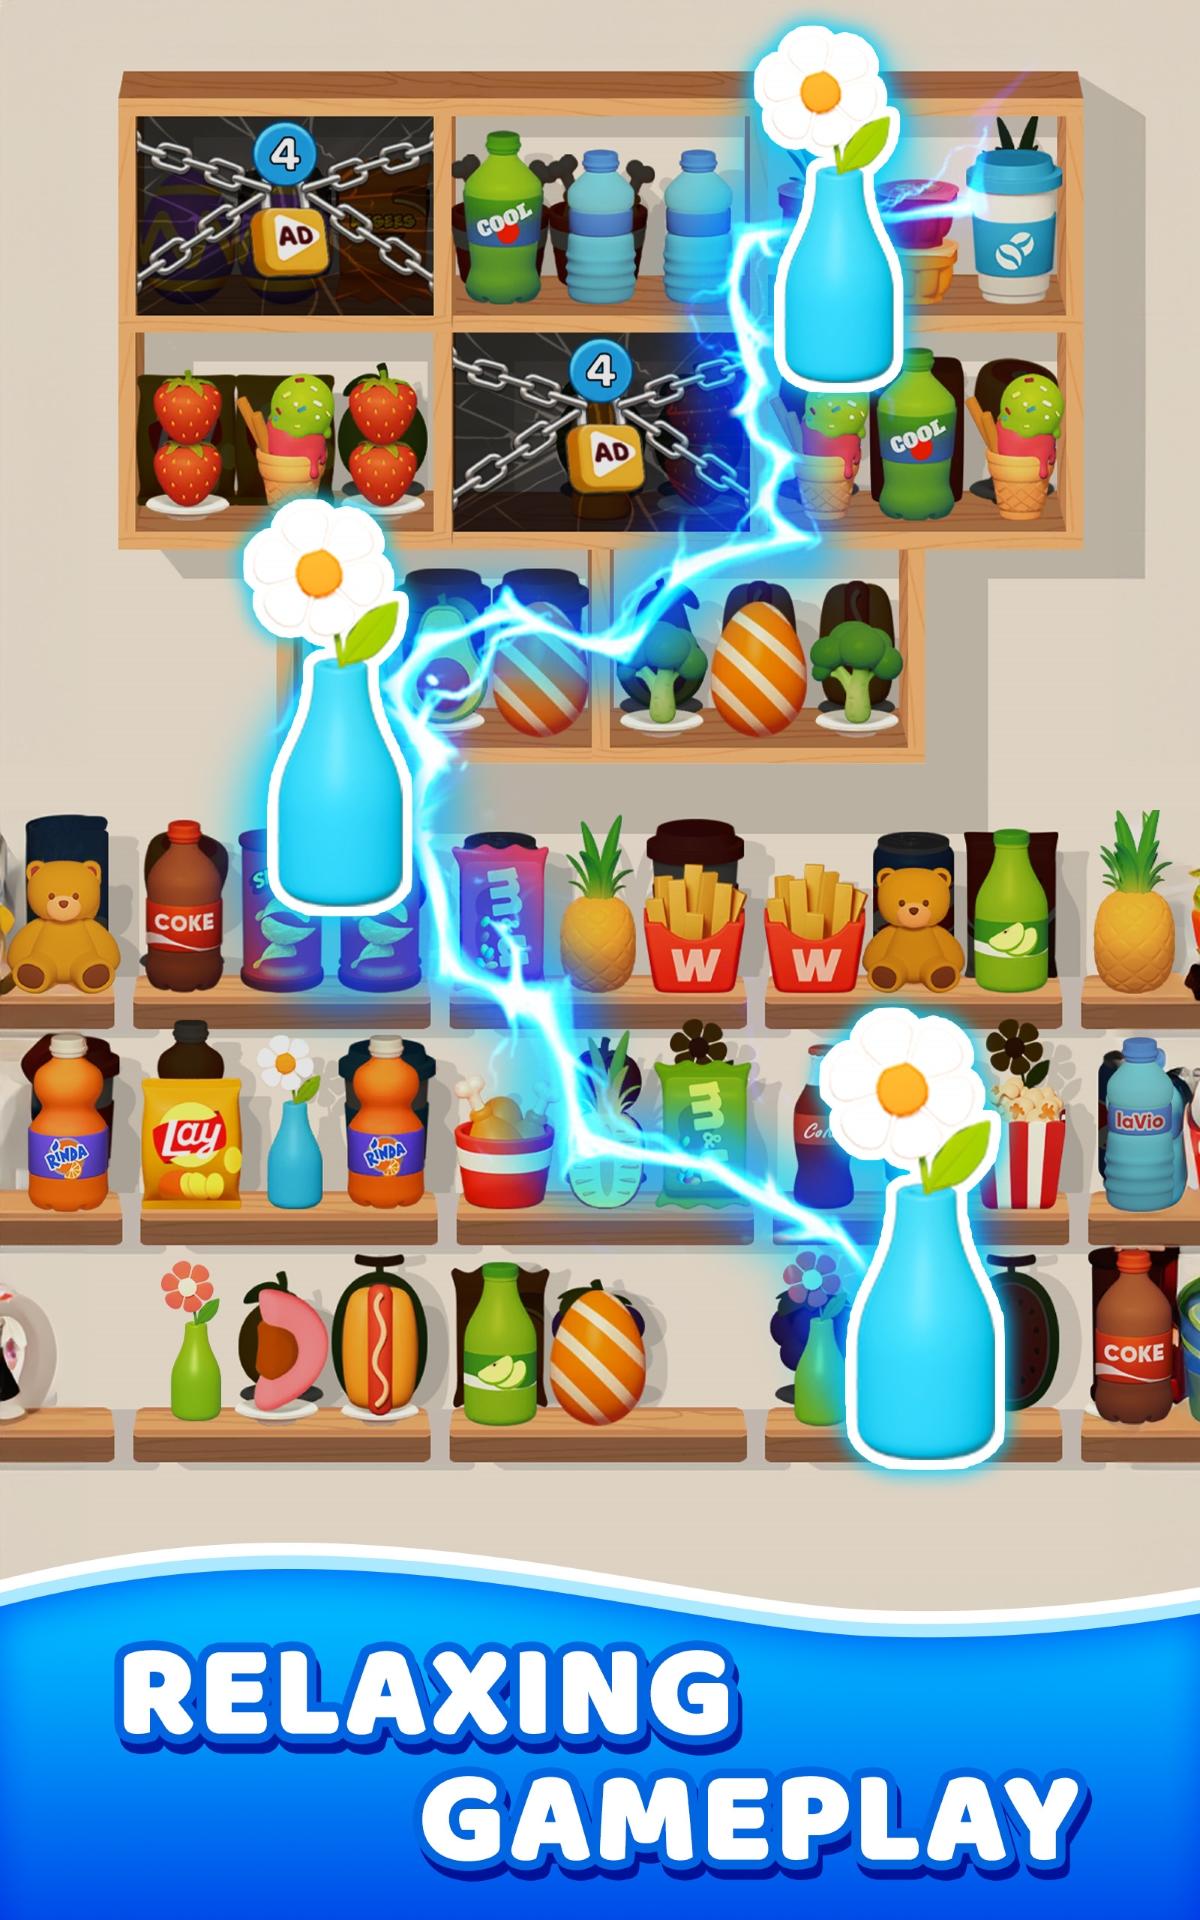 Screenshot of Goods Sorting: Match 3 Puzzle